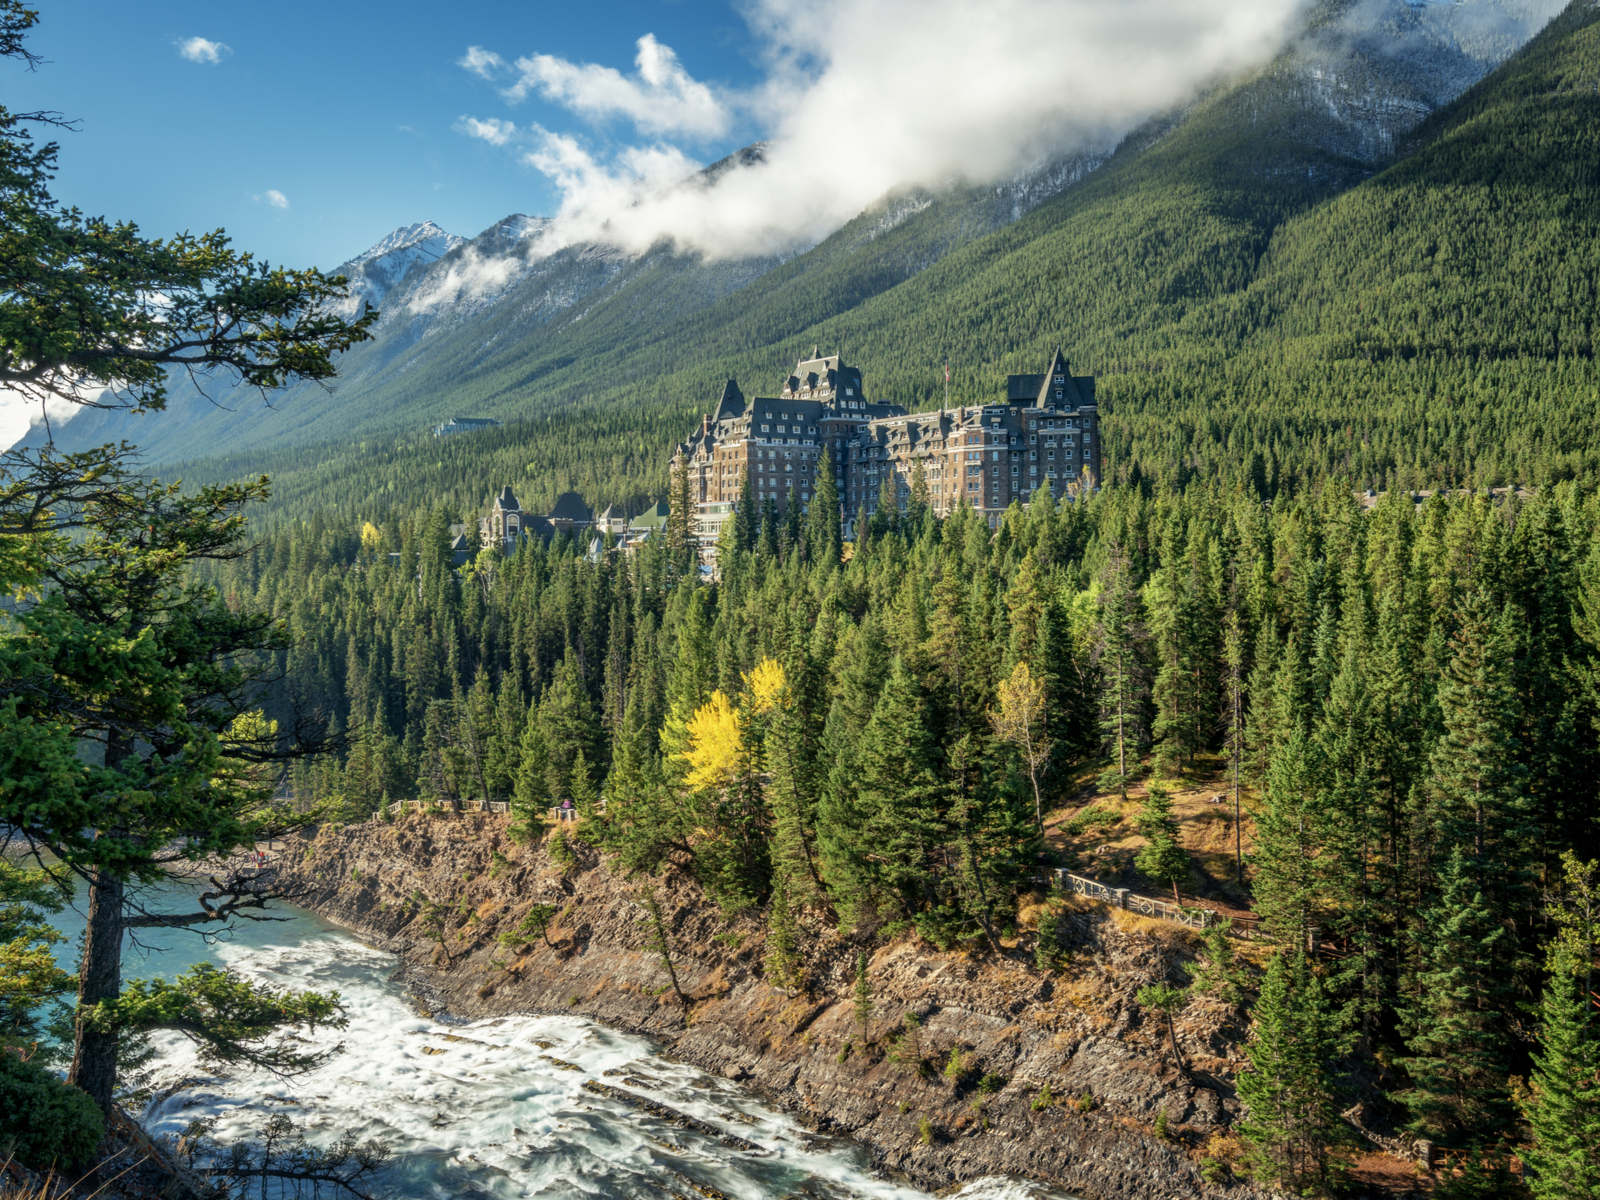 Fairmont Springs Hotel pictured during the least busy time to visit Banff